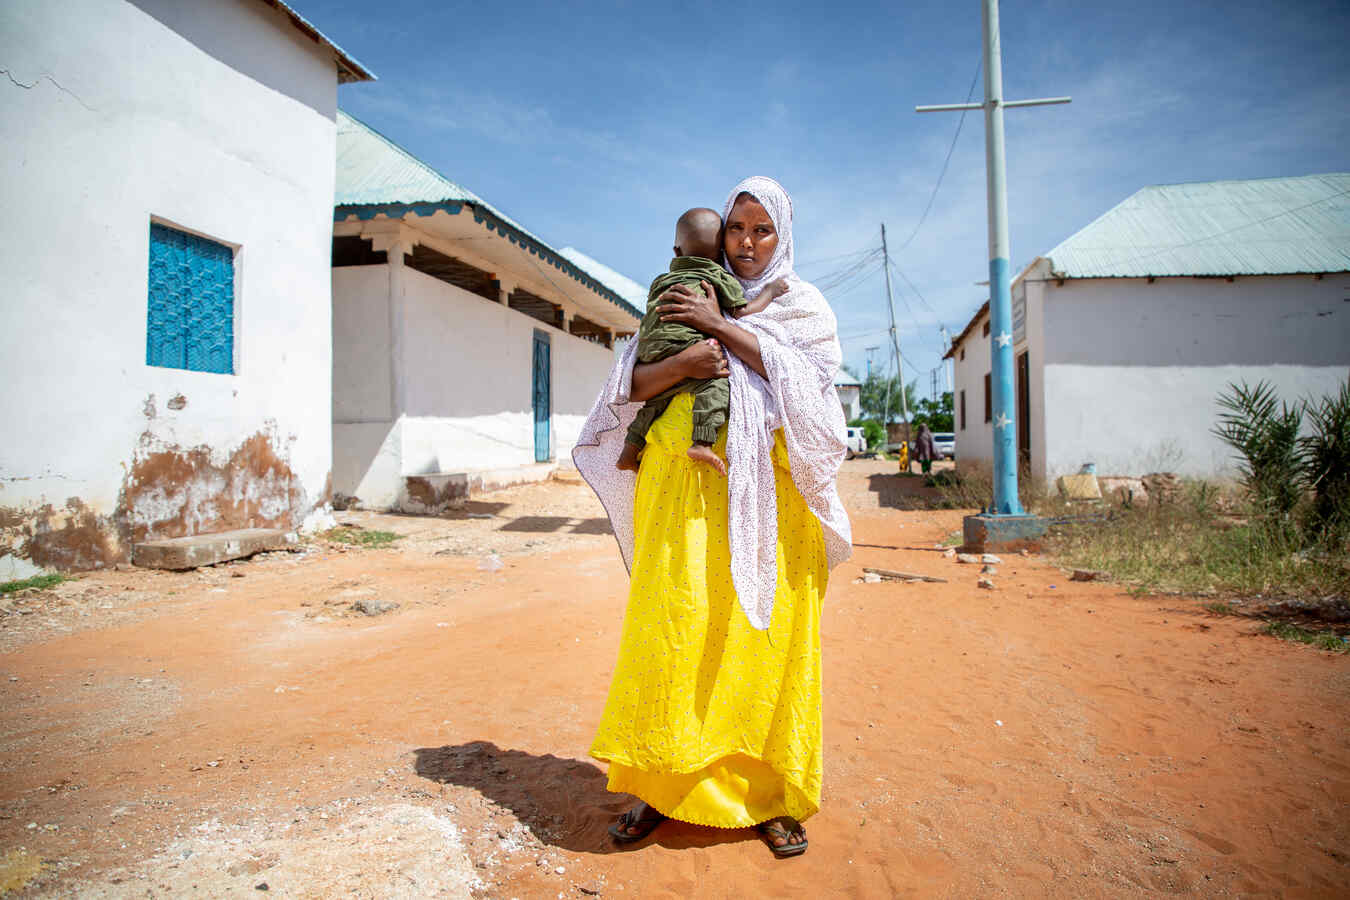 Fartun stands in the street, holding her baby son.